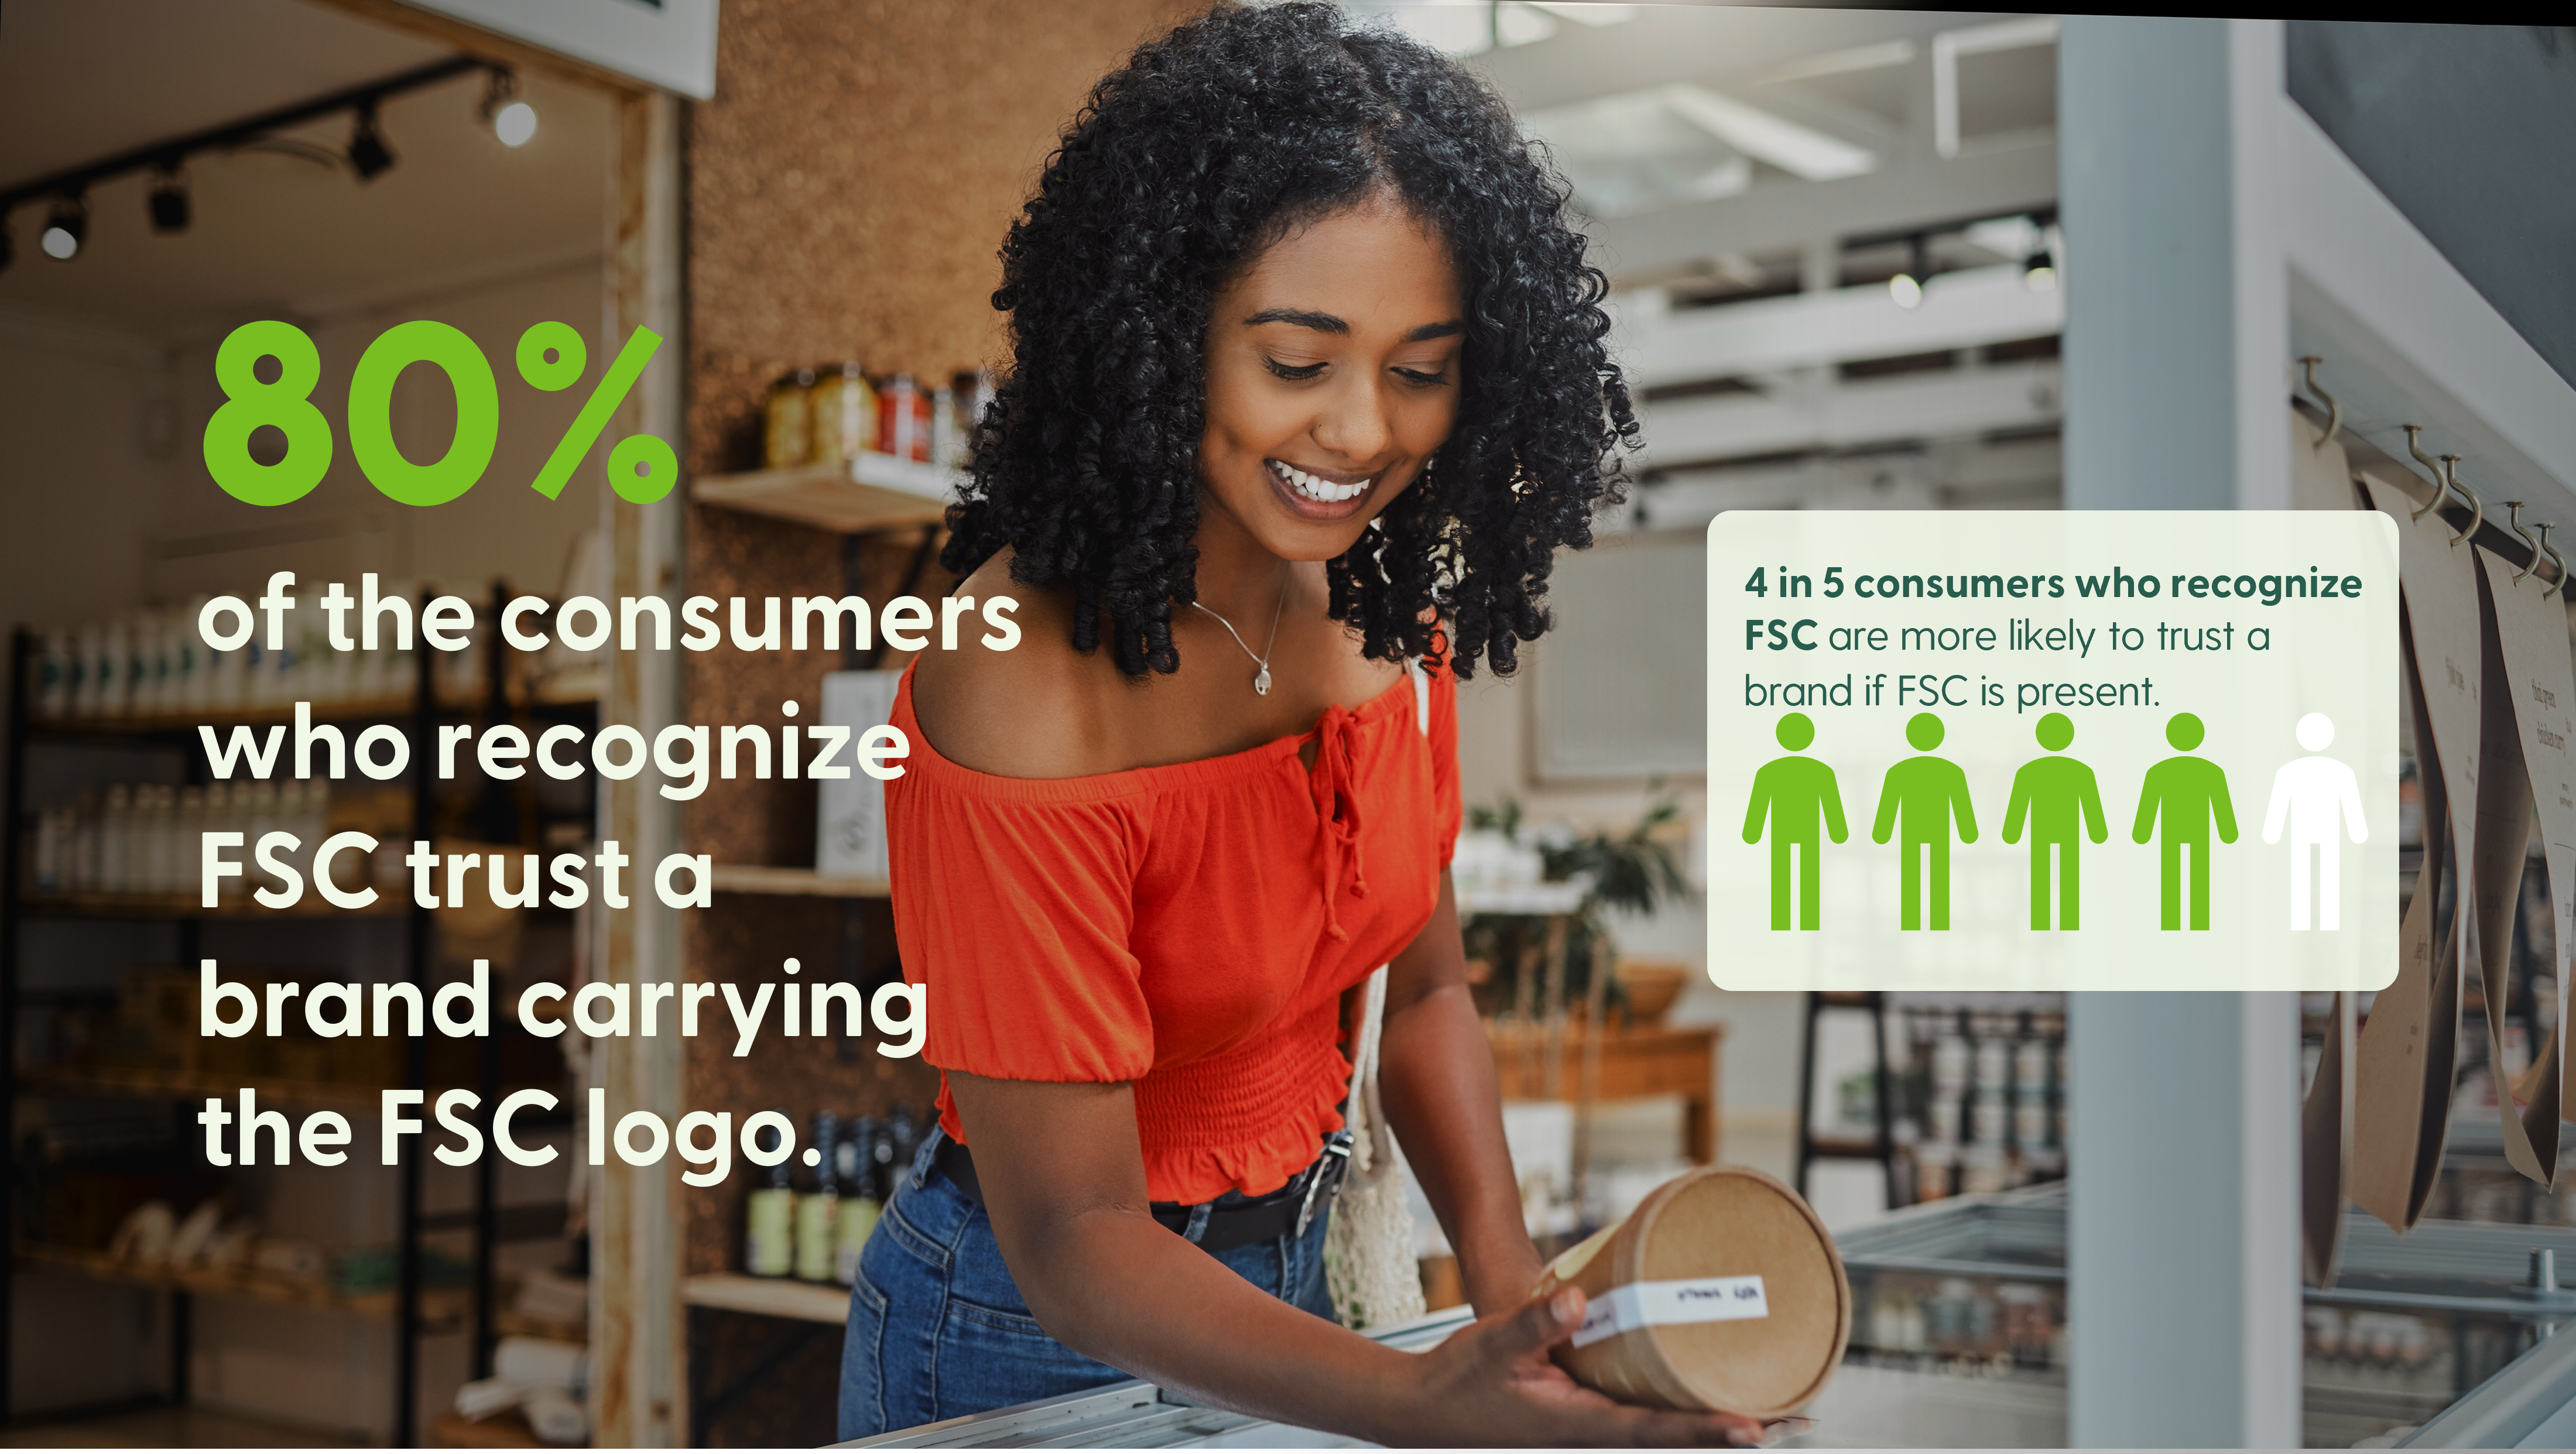 80% of the consumers who recognize FSC trust a brand carrying the FSC logo.